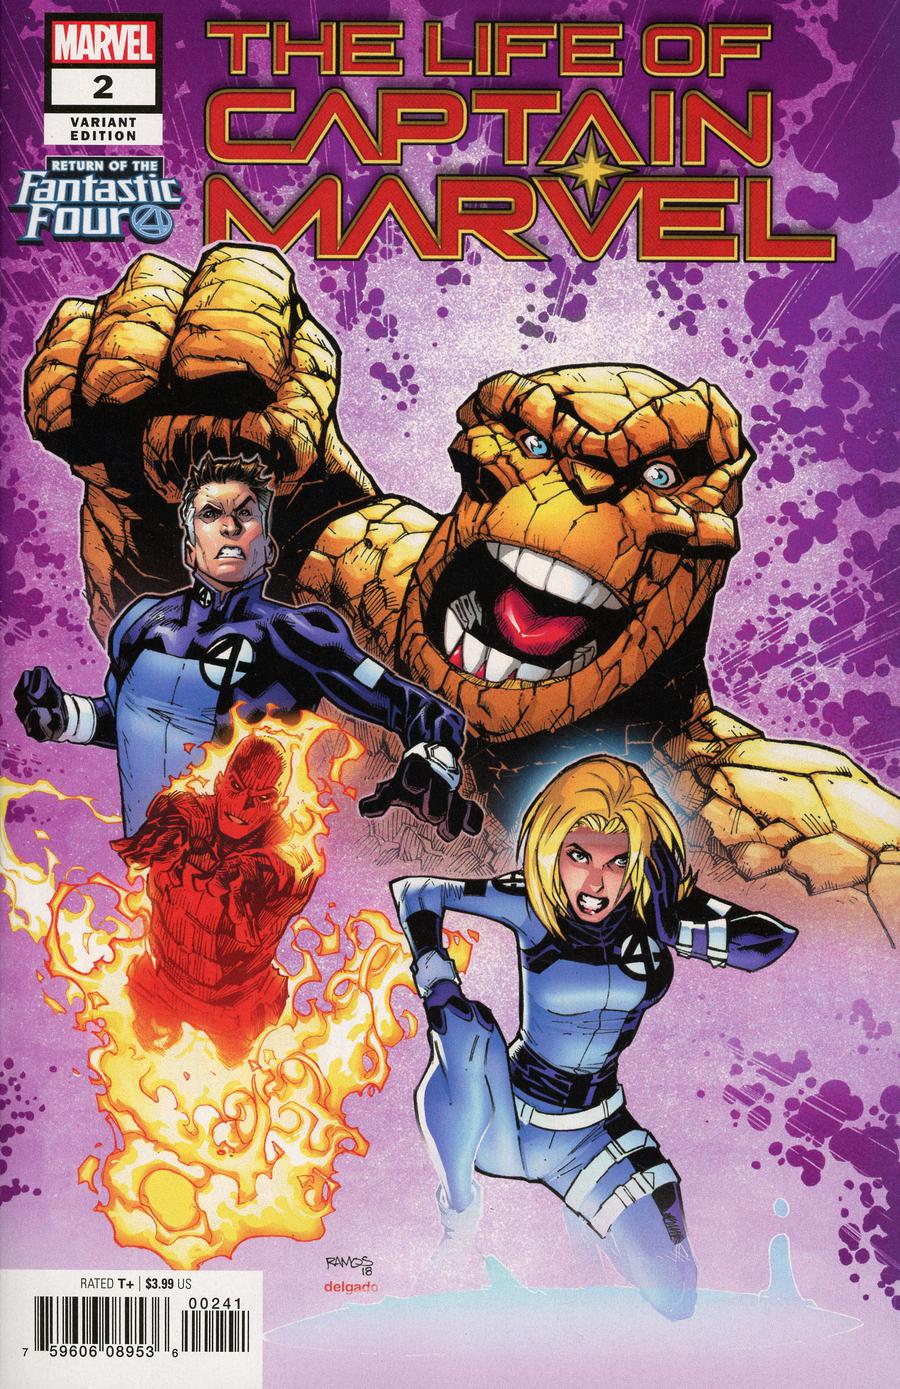 Life Of Captain Marvel Vol 2 #2 Cover B Variant Humberto Ramos Return Of The Fantastic Four Cover